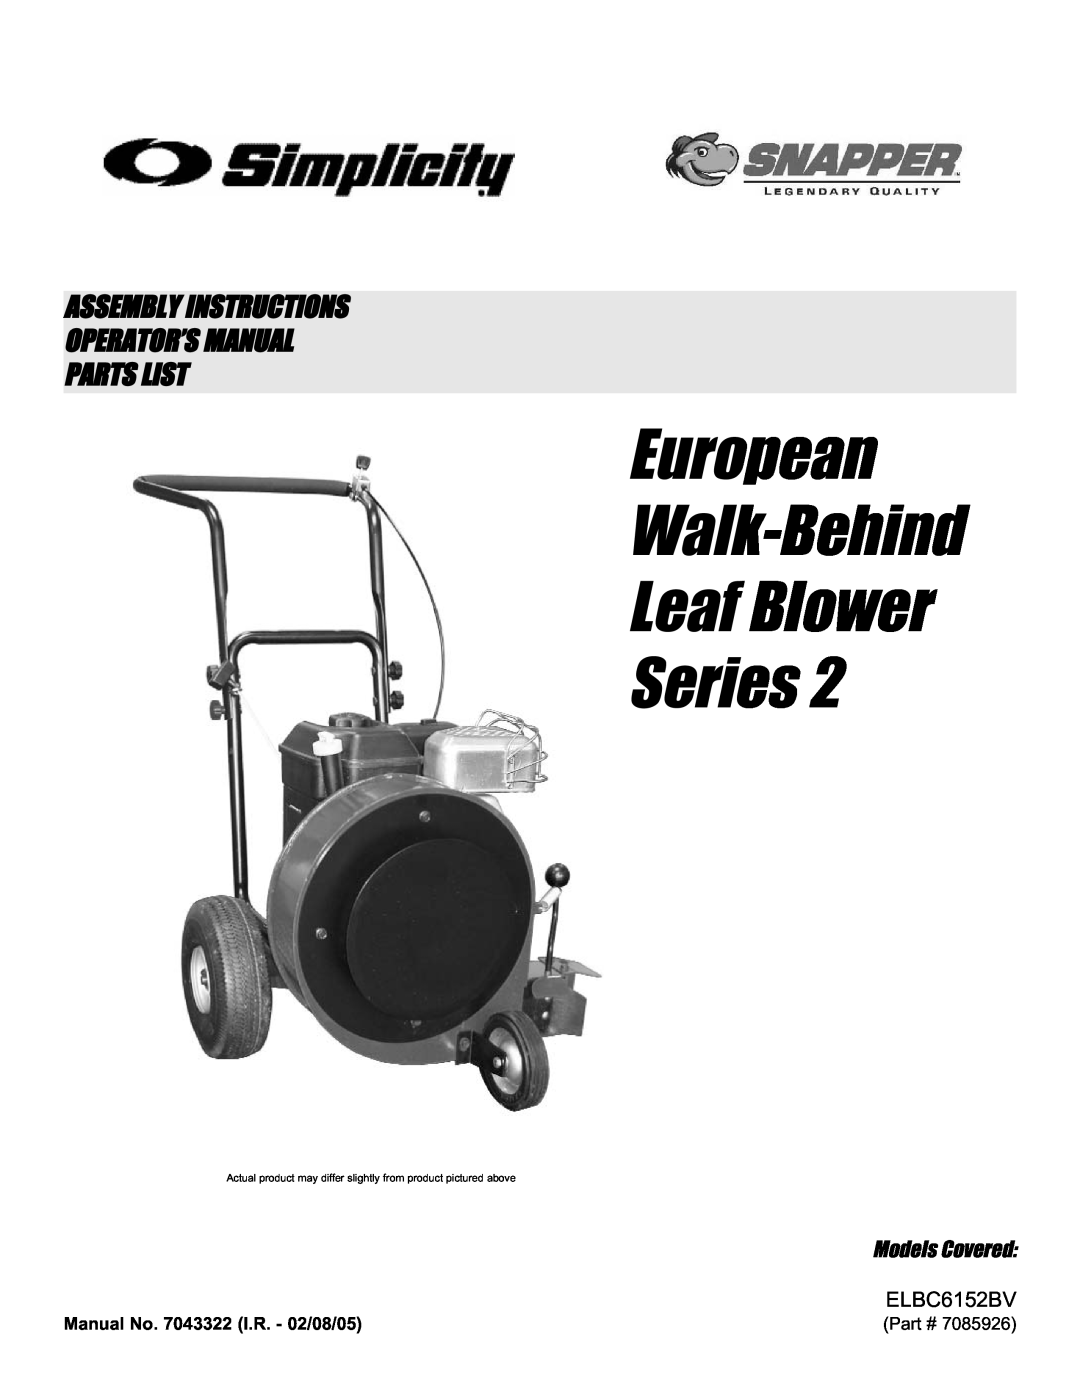 Snapper ELBC6152BV manual European Walk-Behind Leaf Blower Series, Assembly Instructions Operator’S Manual, Parts List 